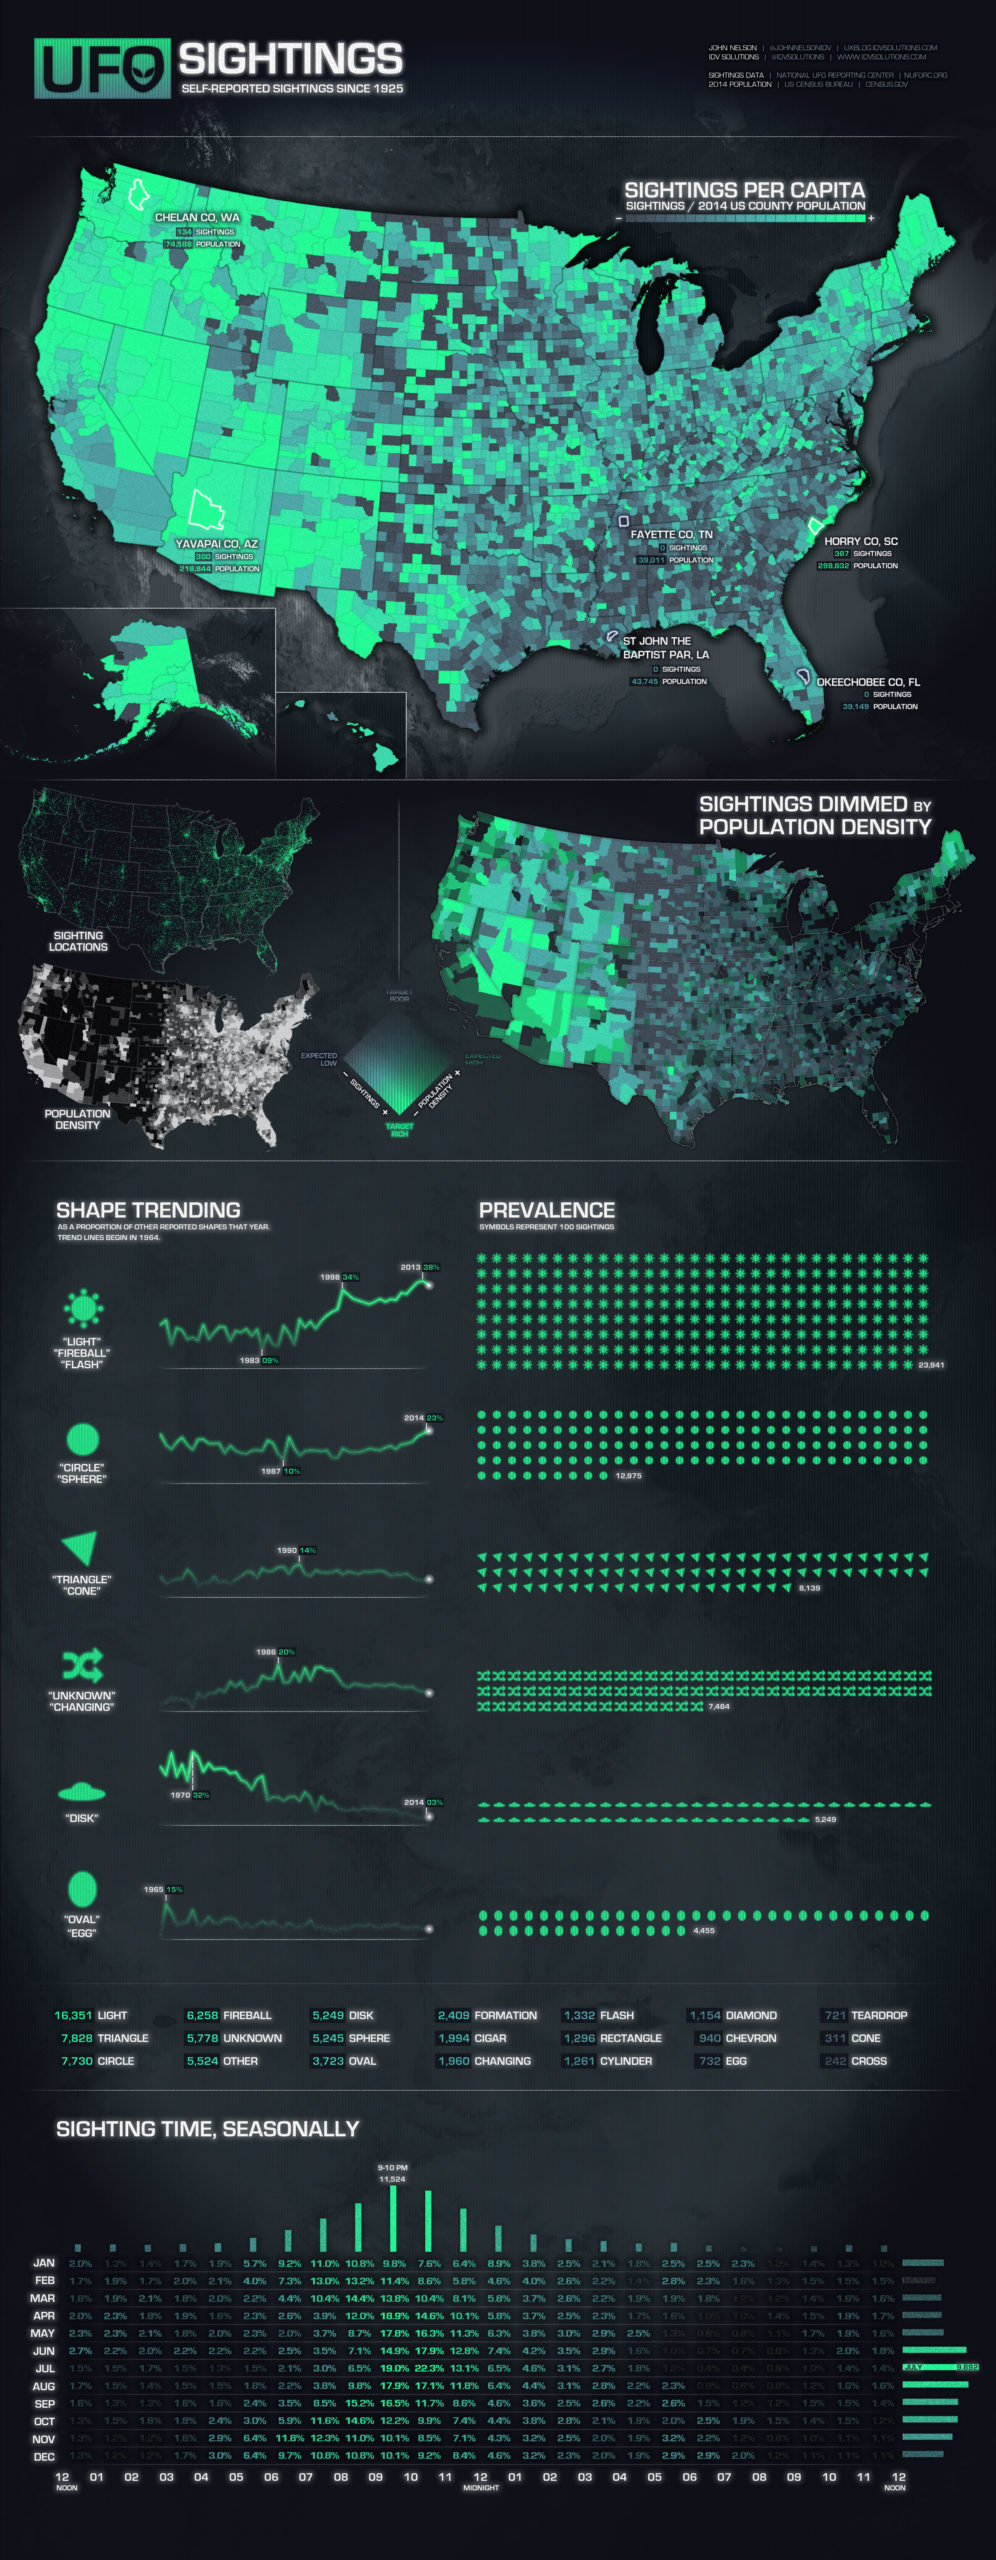 Map Shows Where UFO Sightings Are Seen The Most In The USA